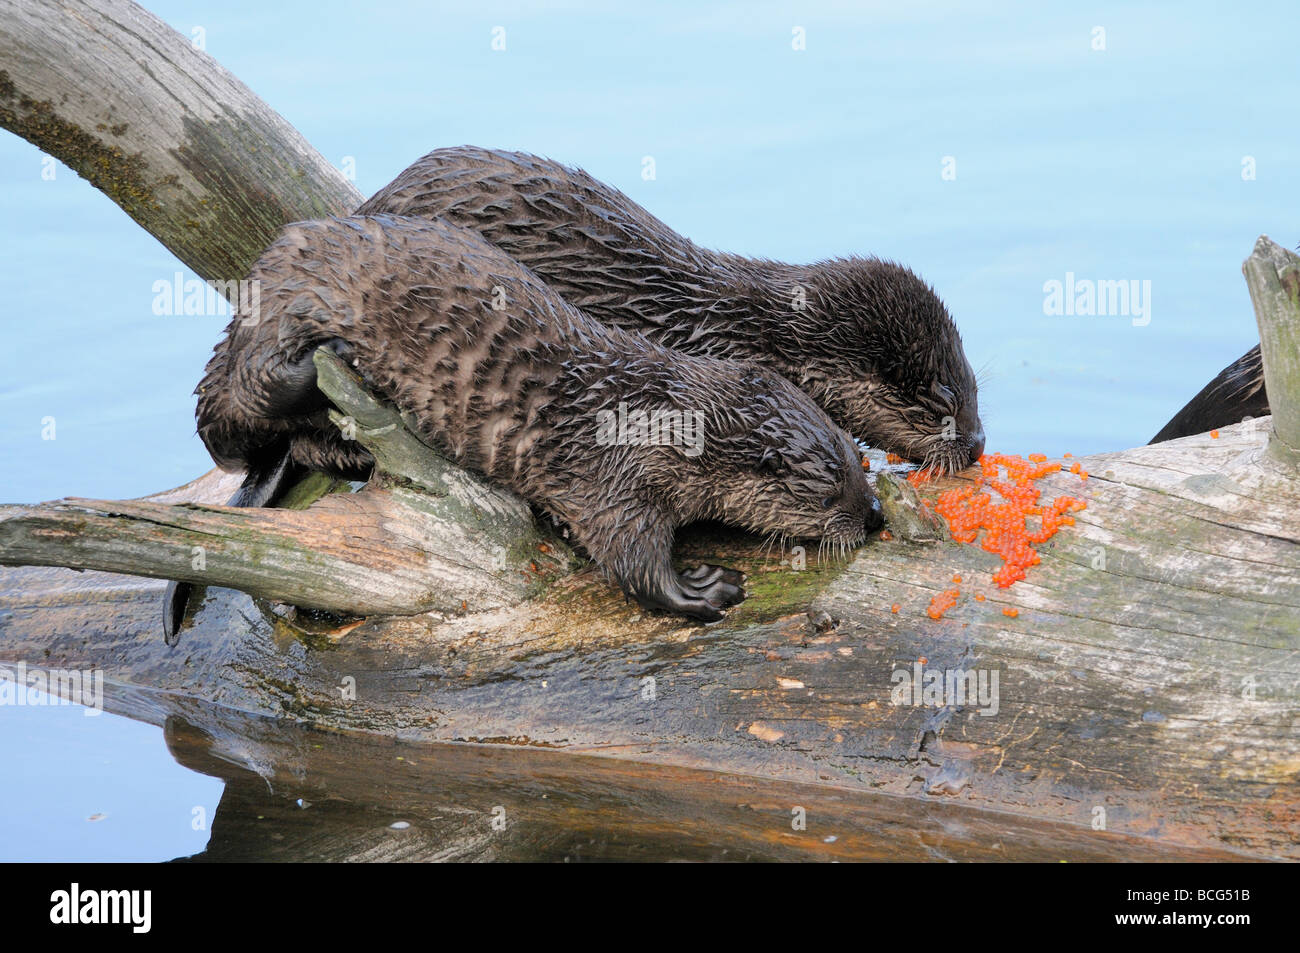 Stock photo of two river otter pups eating fish eggs on a log at a lake, Yellowstone National Park, Montana, 2009. Stock Photo